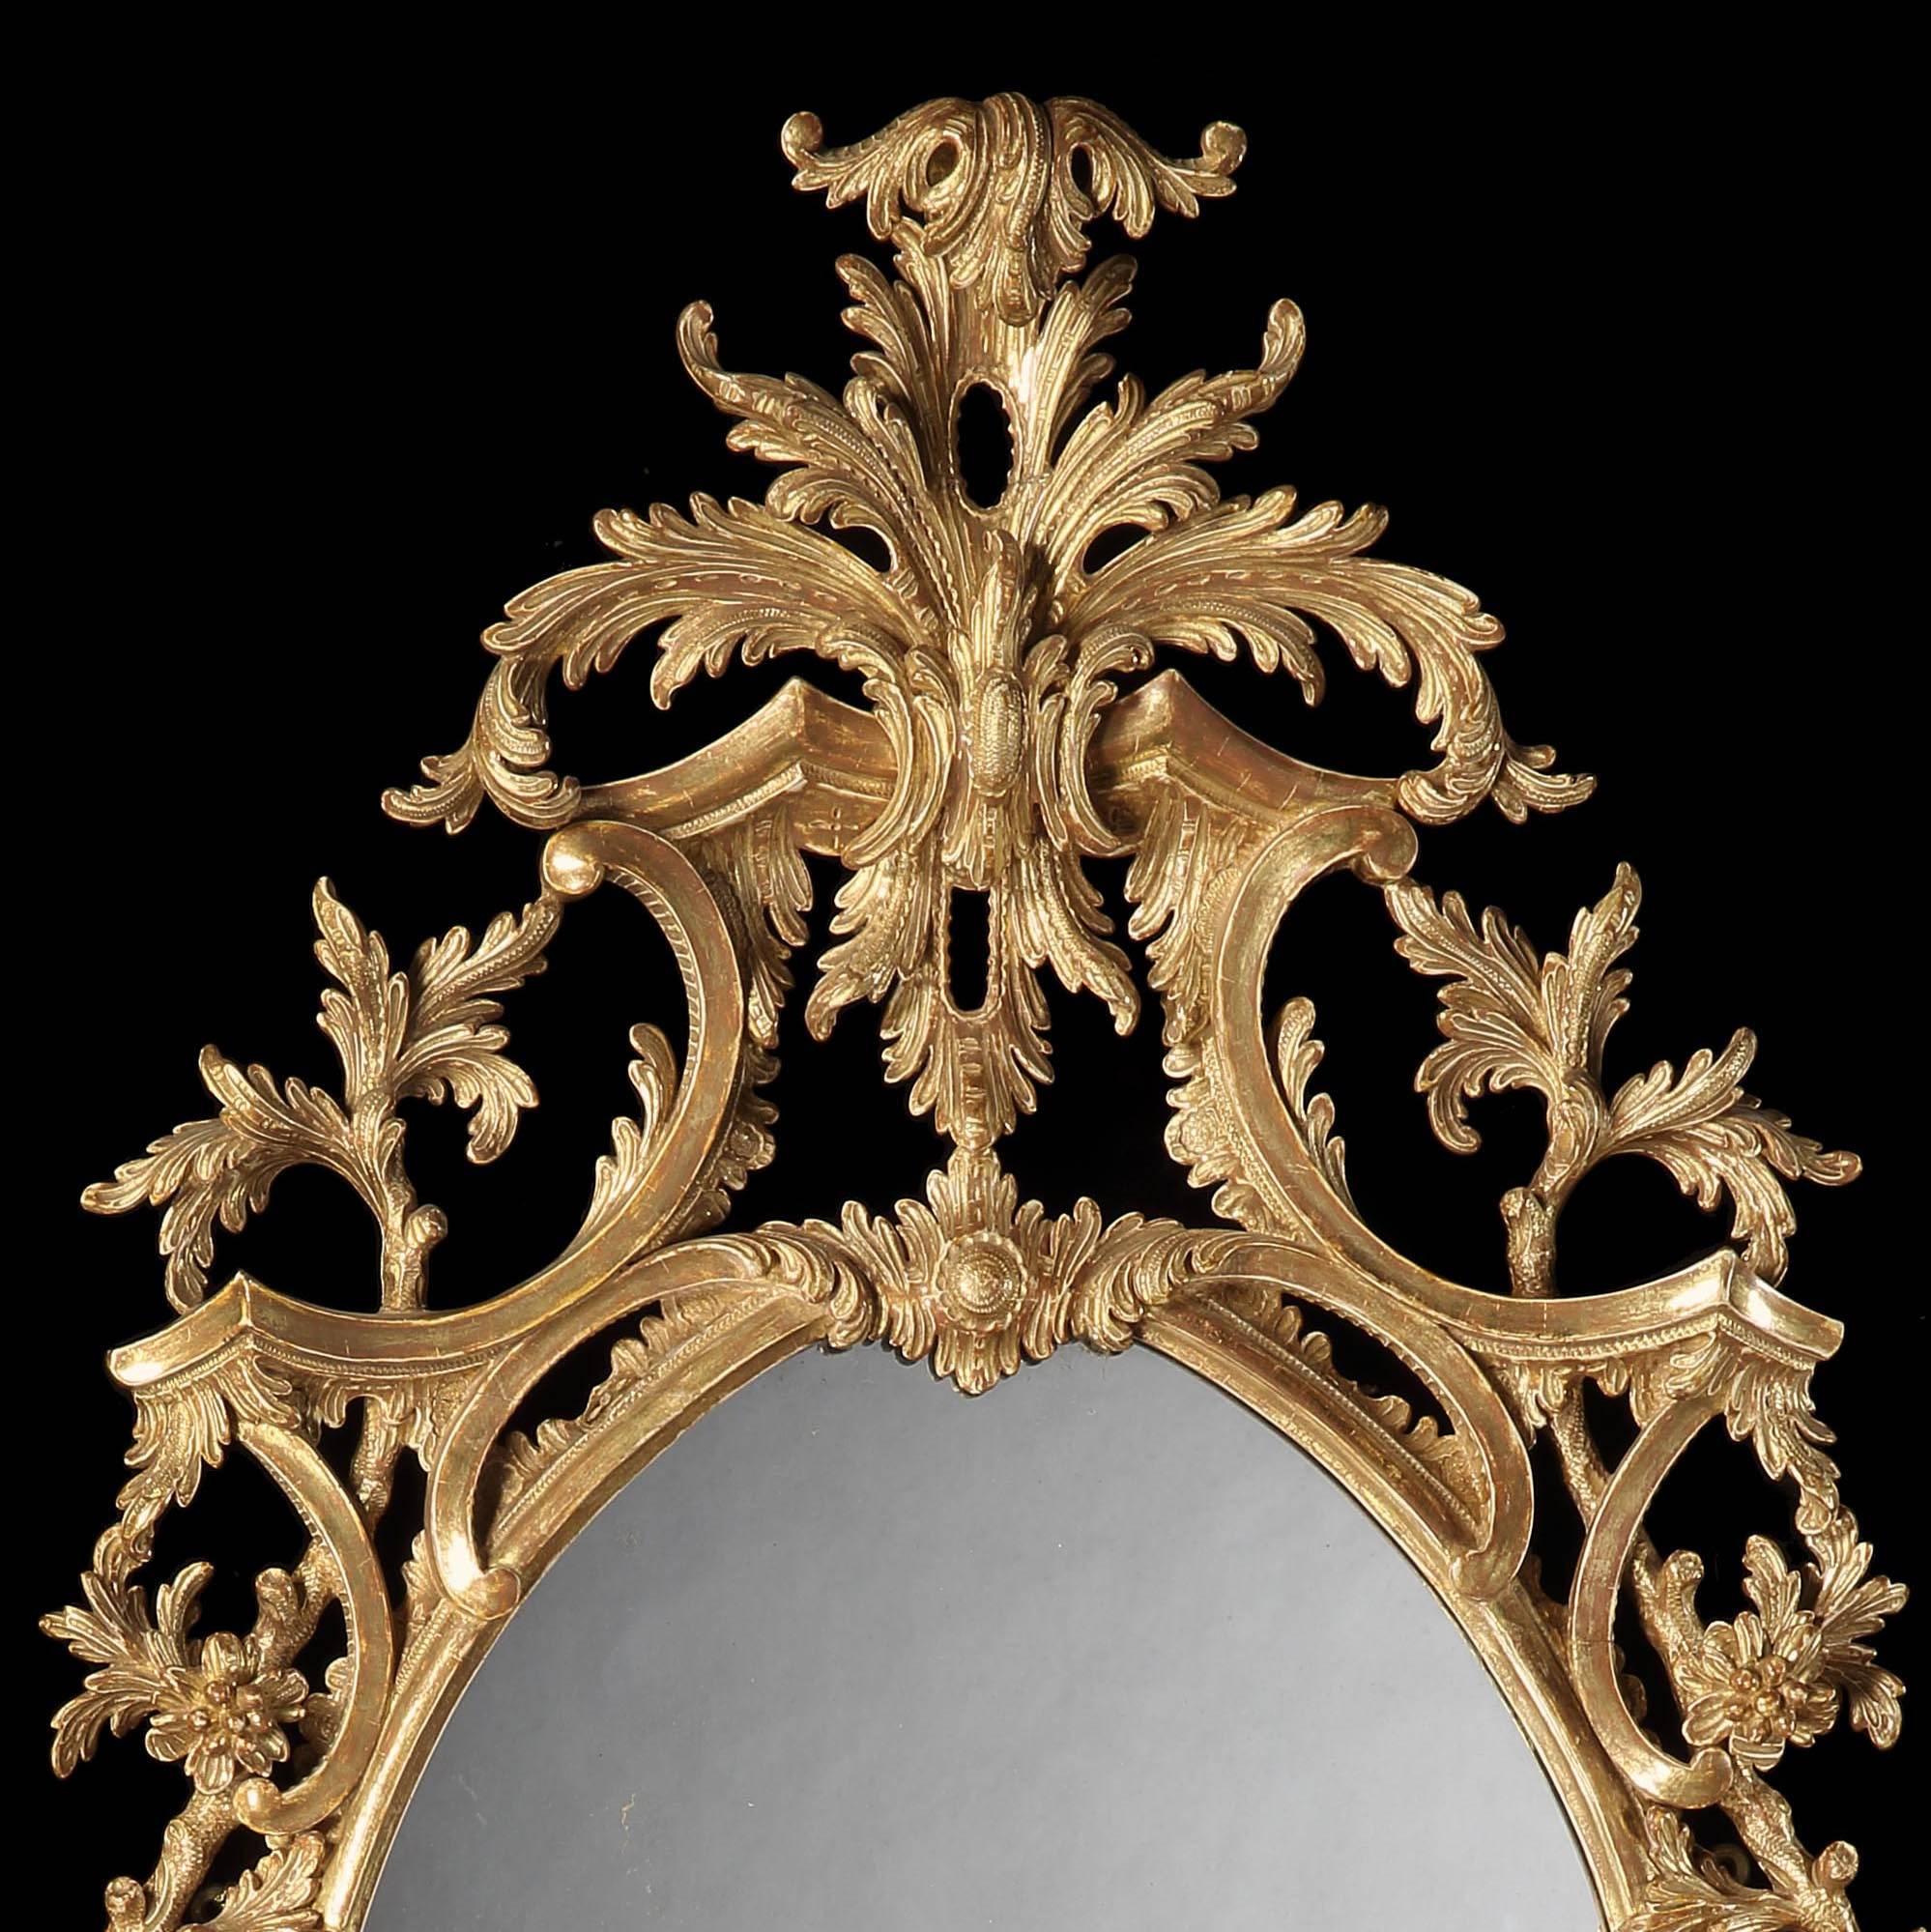 Great Britain (UK) Pair of 19th Century English Giltwood Mirrors in the George III Style